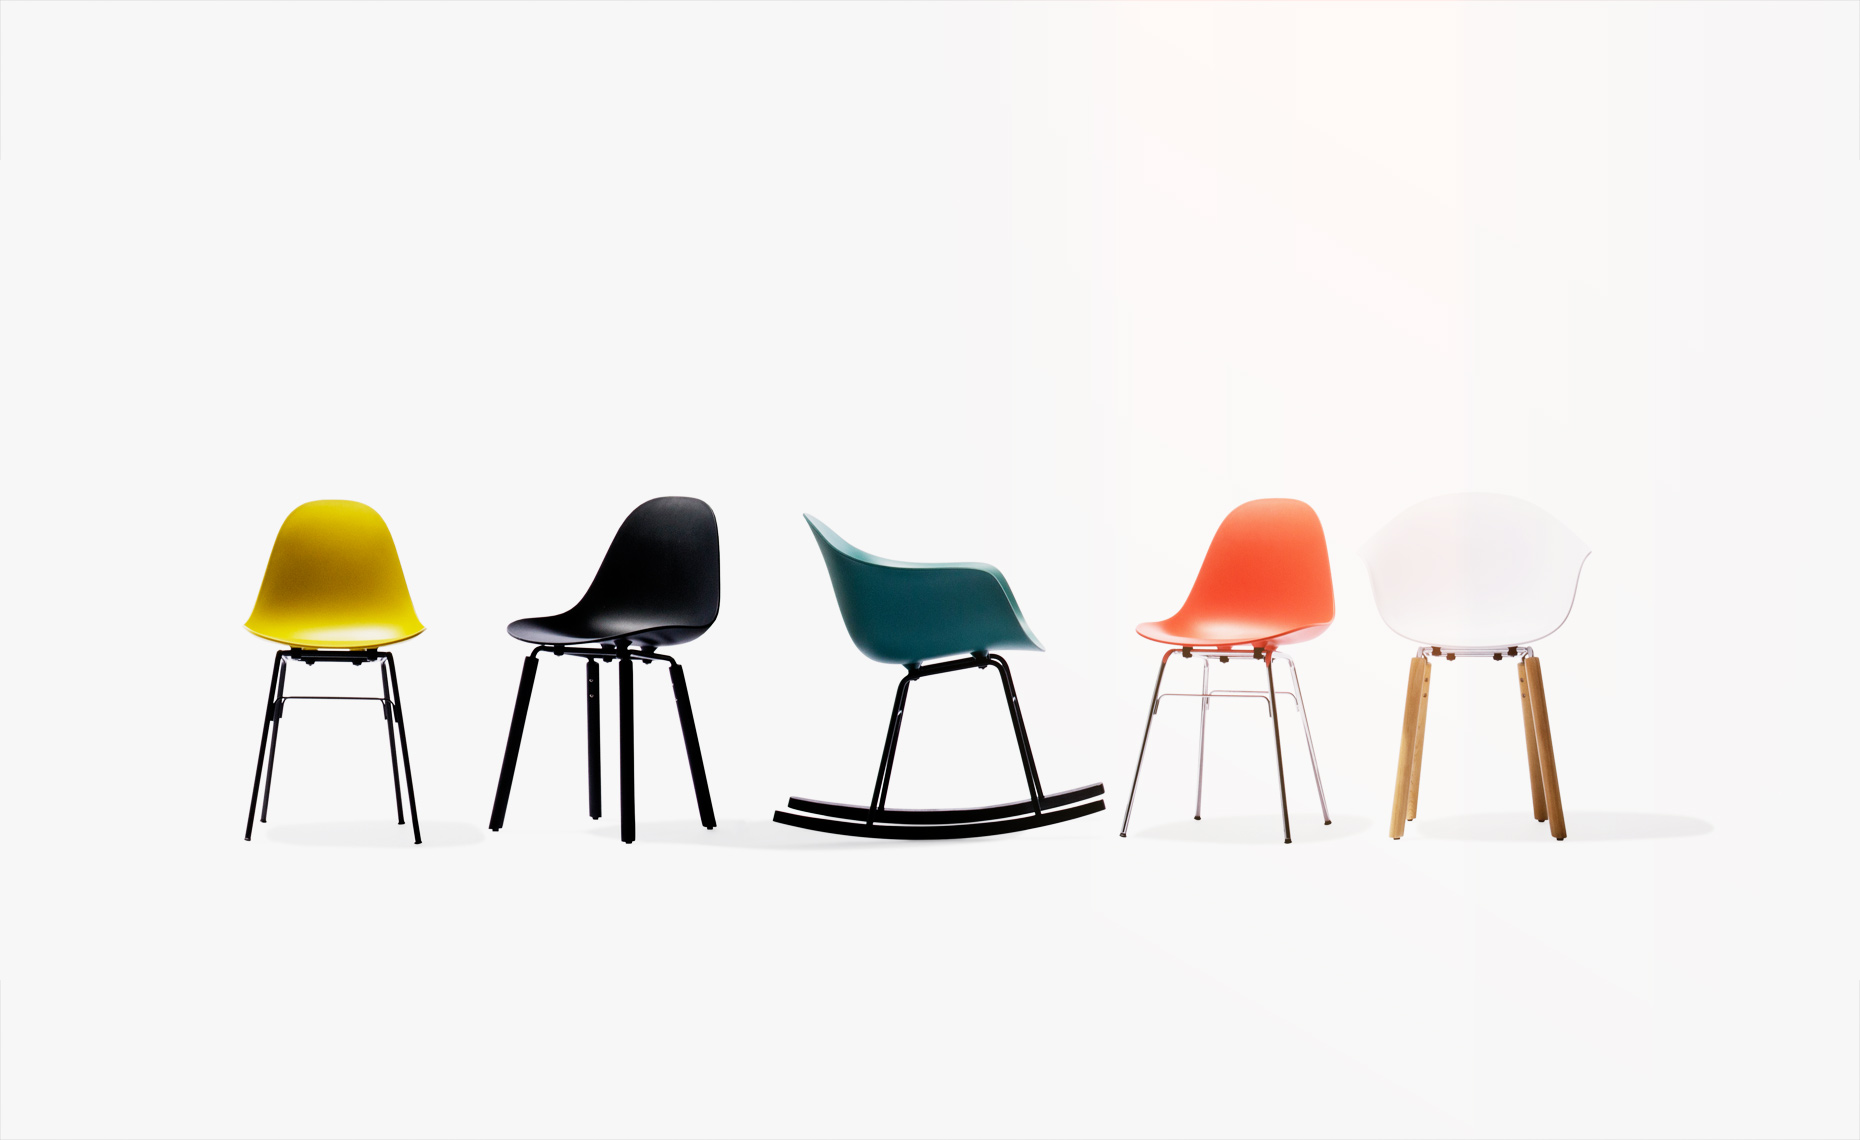 Five modern side chairs in playful group